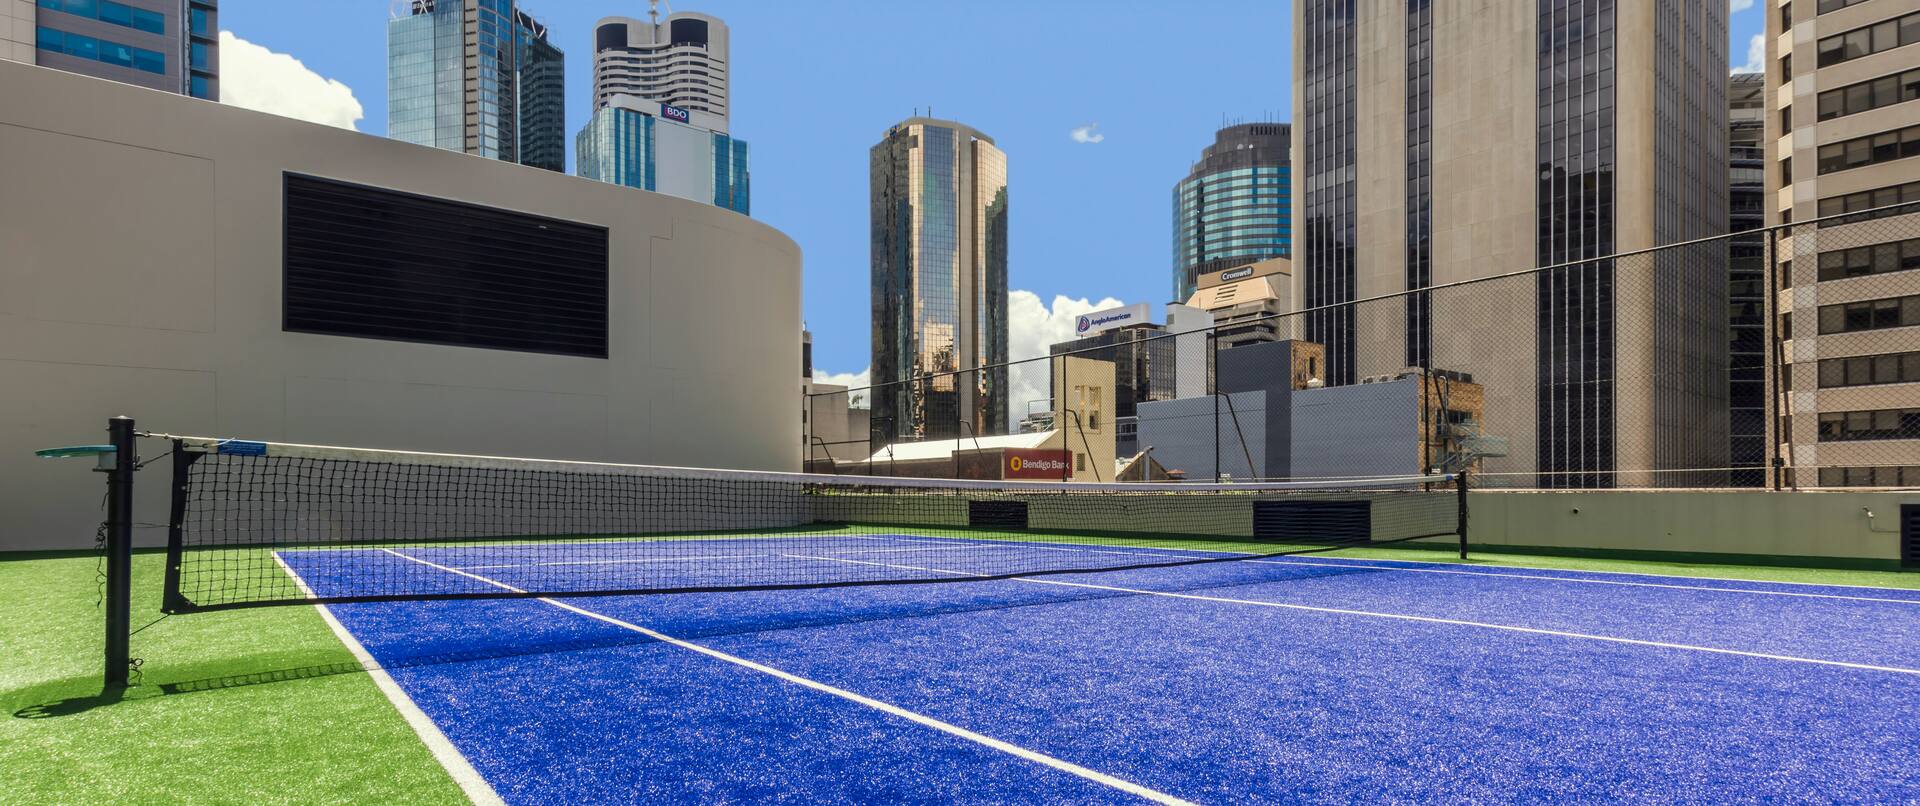 Rooftop Tennis Court and View of City